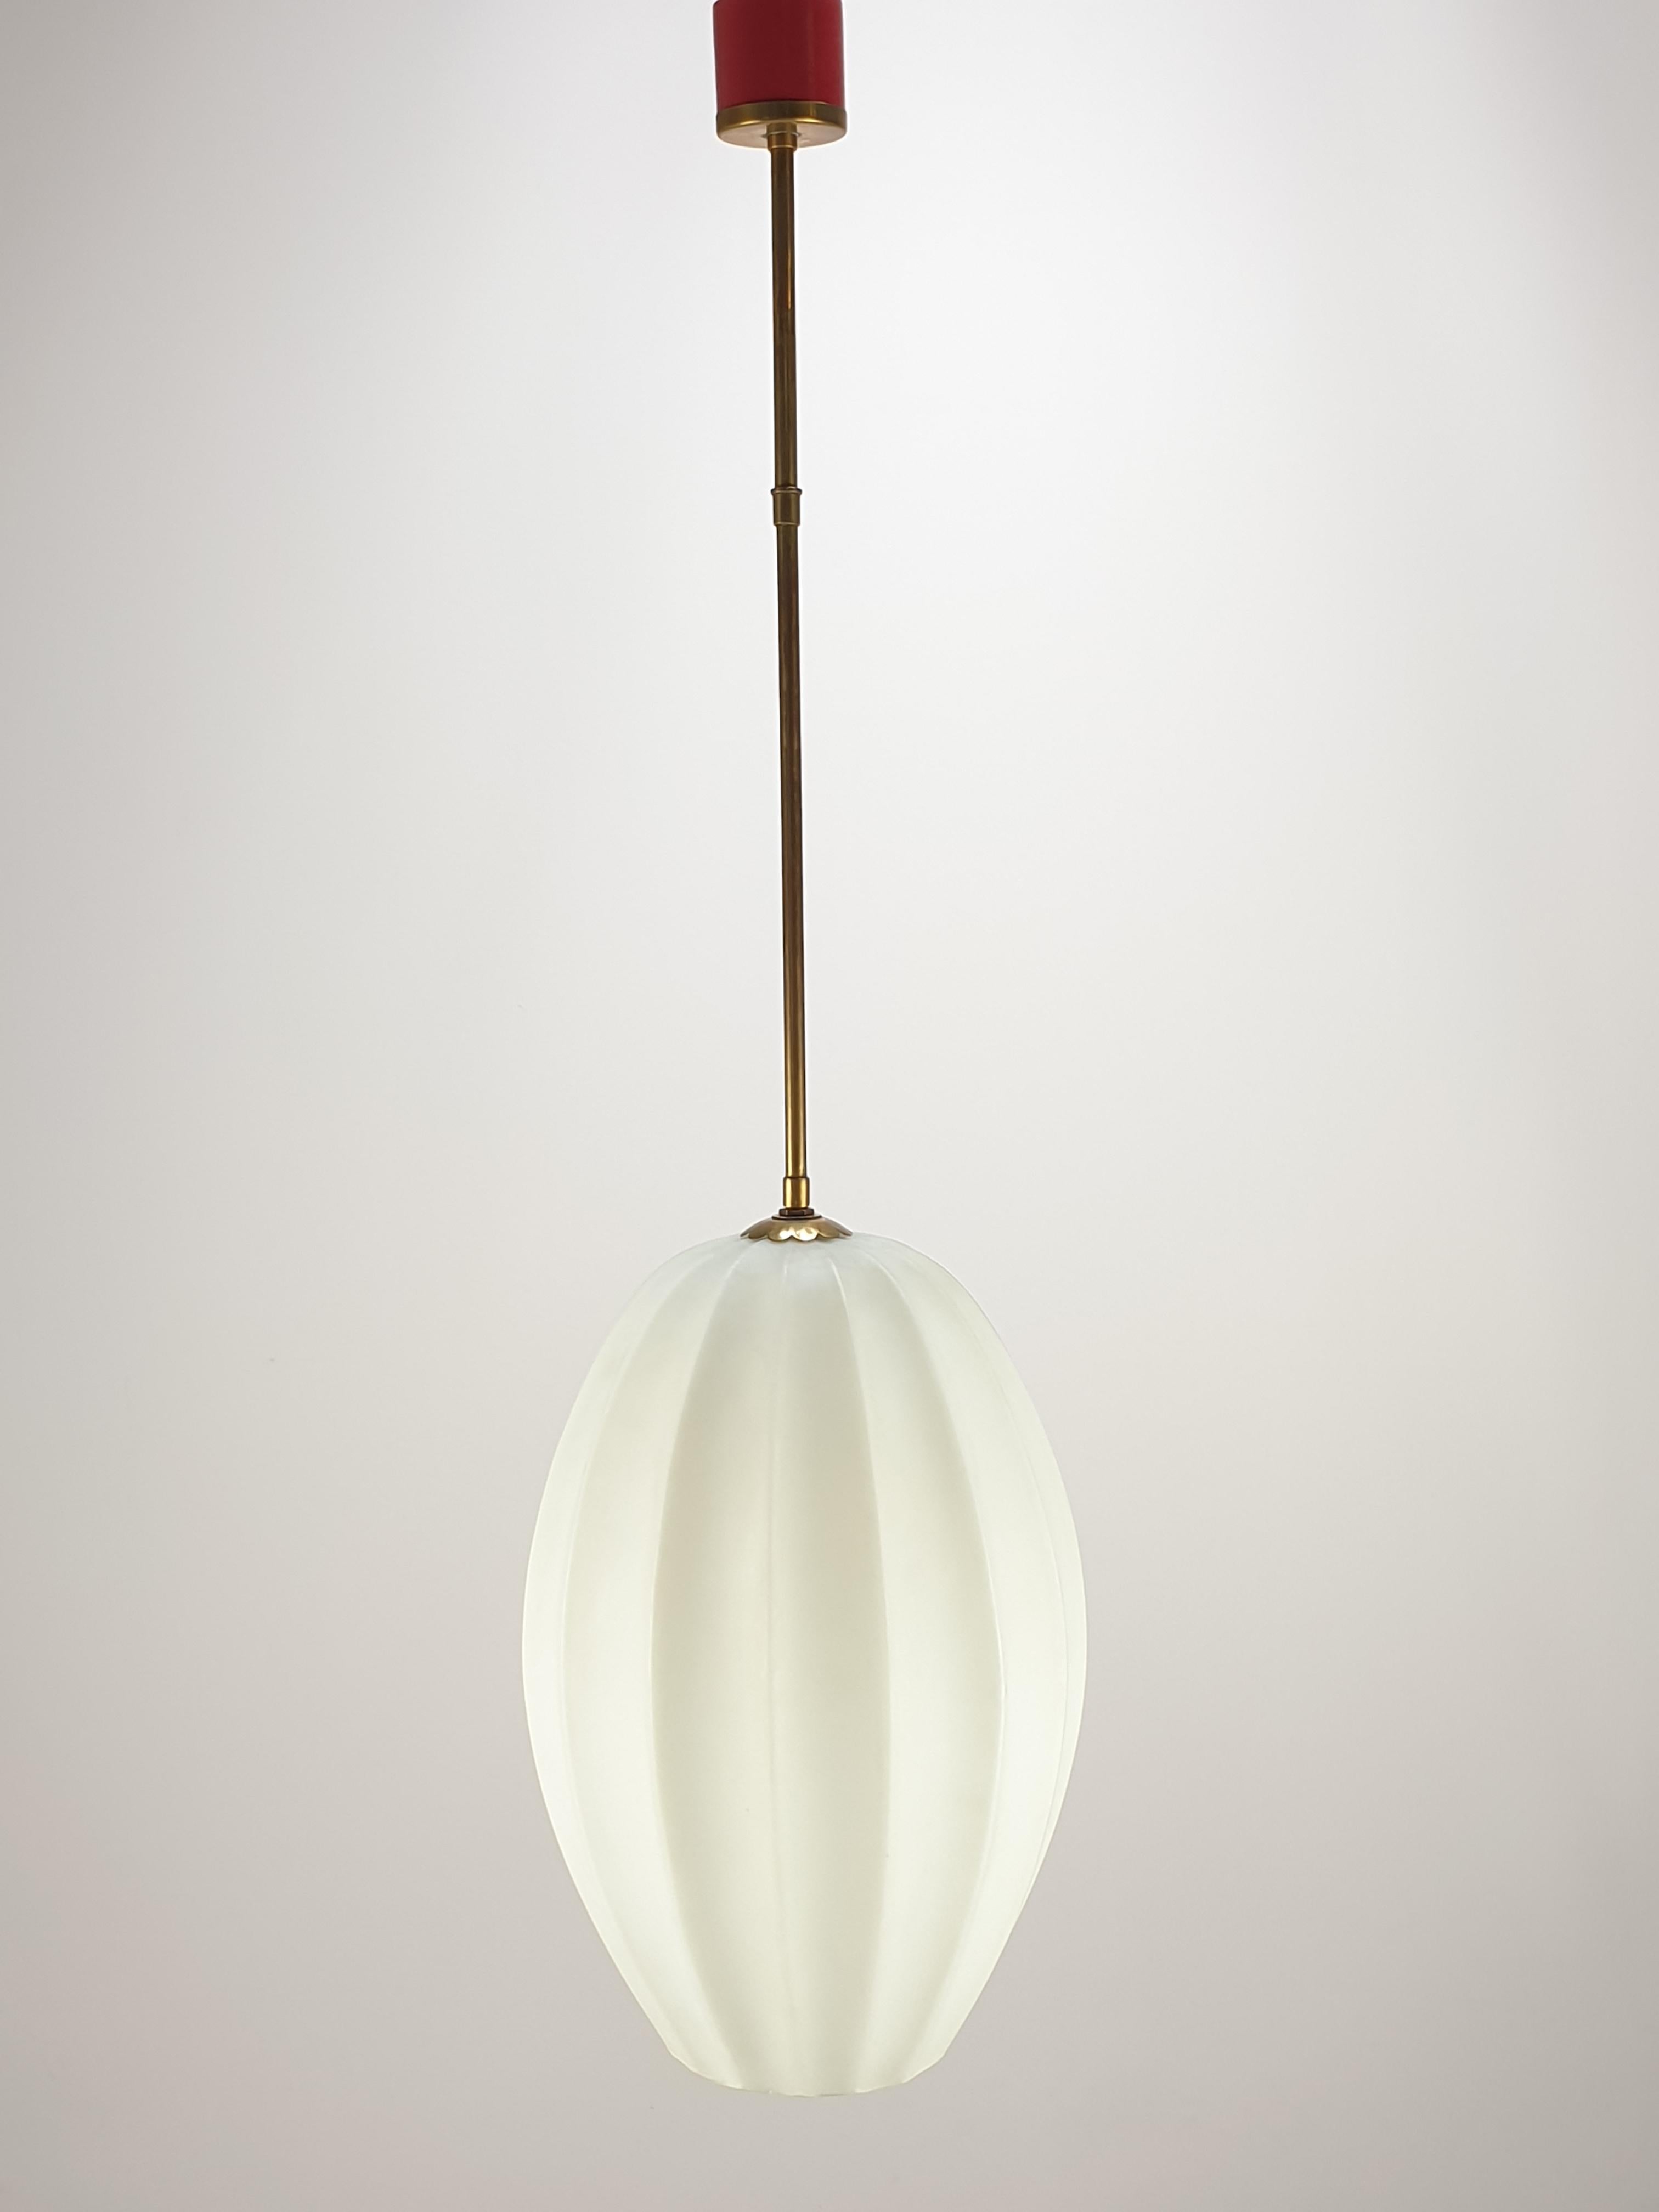 Stunning Italian lamp attributed to Stilnovo, circa 1958.

Elegant pendant lamp with striped satin white glass and brass accents. 
See the lovely details on the pictures.

The lamp gives a wonderful atmosphere in your room.